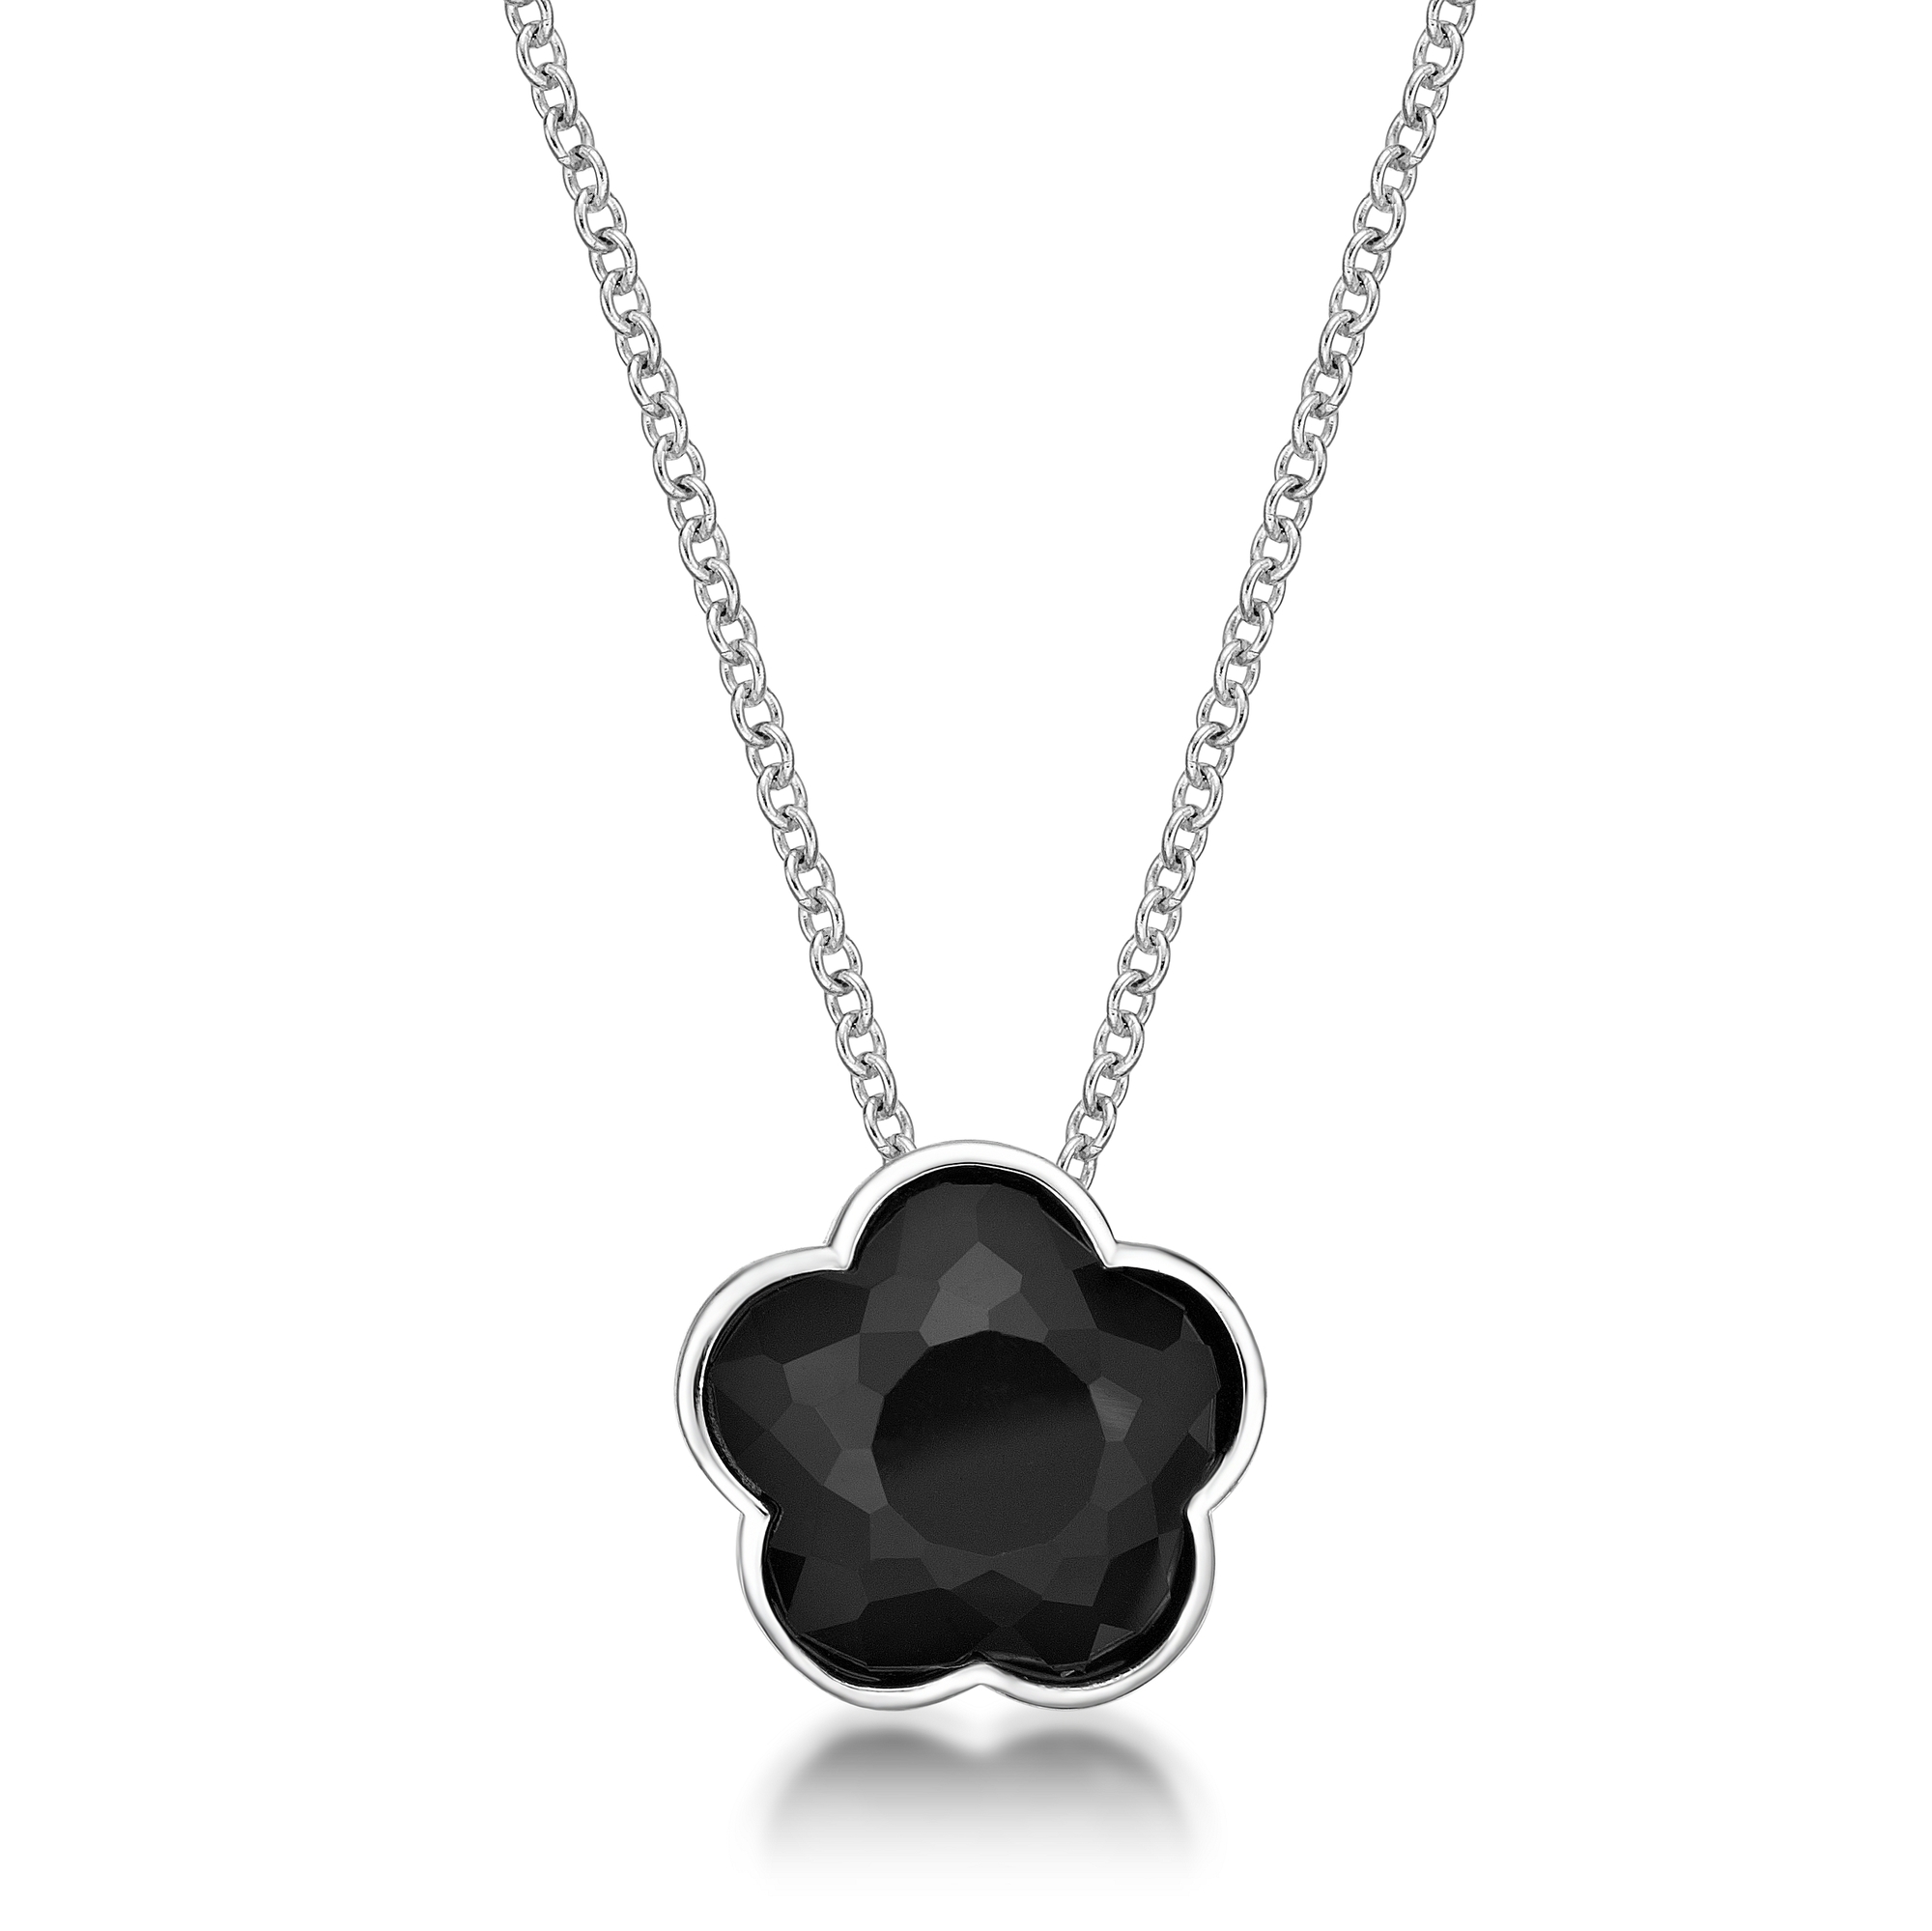 51173-pendant-default-collection-sterling-silver-51173-3.jpg